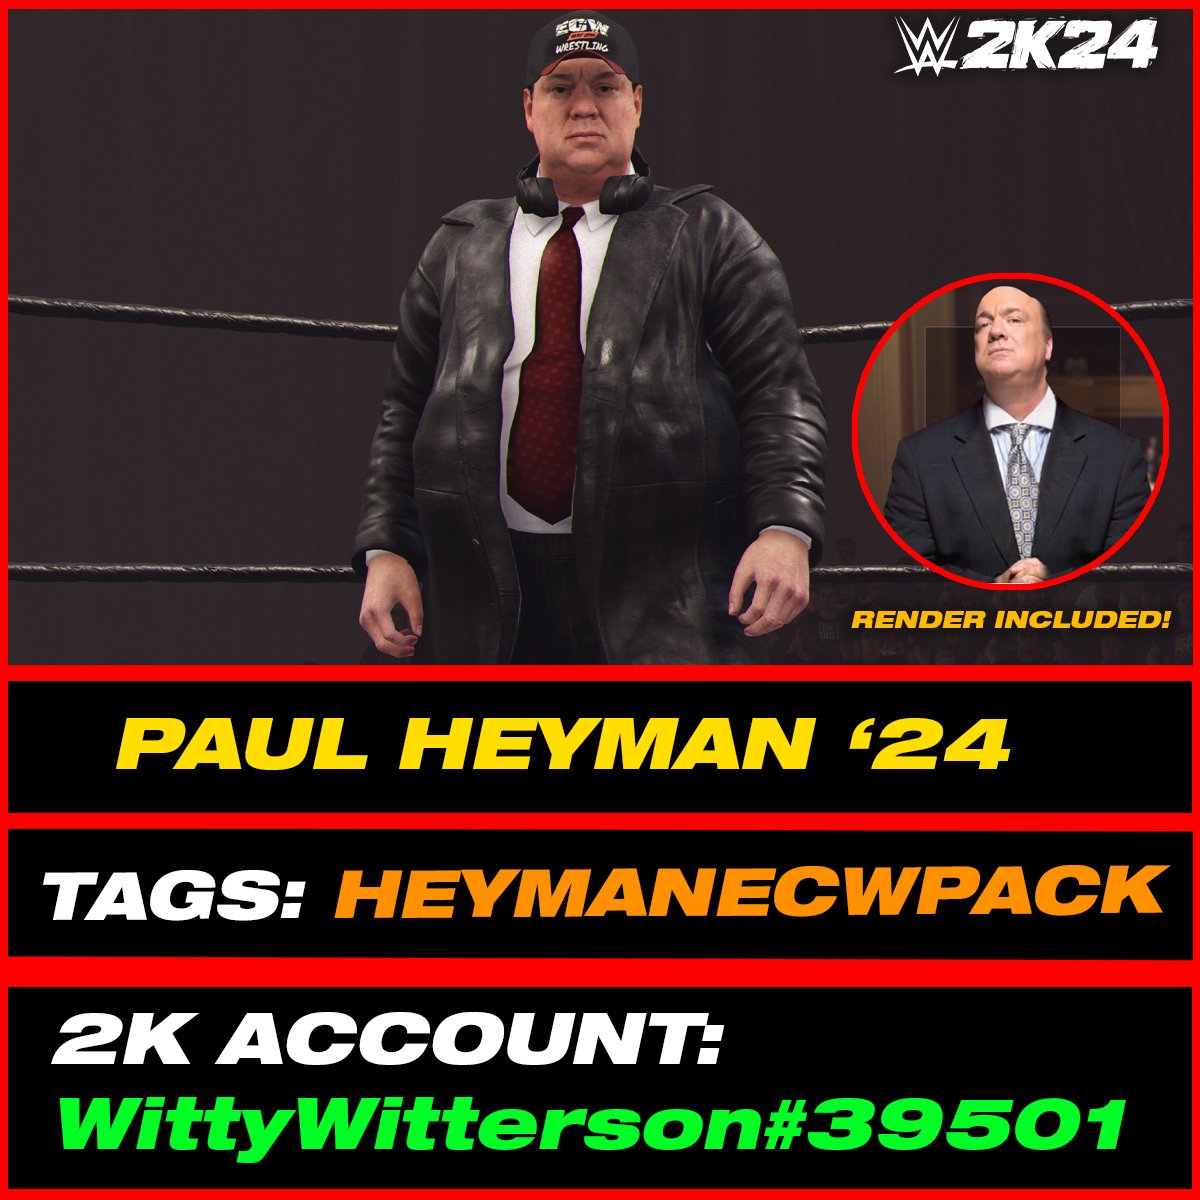 Paul Heyman '24 (In-Game Edit) is uploaded onto Community Creations #WWE2K24 

•Hashtags are: HEYMANECWPACK, WITTY226, PaulHeyman

•Collab w/ @SniperCAWS 

INCLUDES:
• Render
• 'Paul' Call Name
• Commentary

@JustBryanNY @LexxGotNext